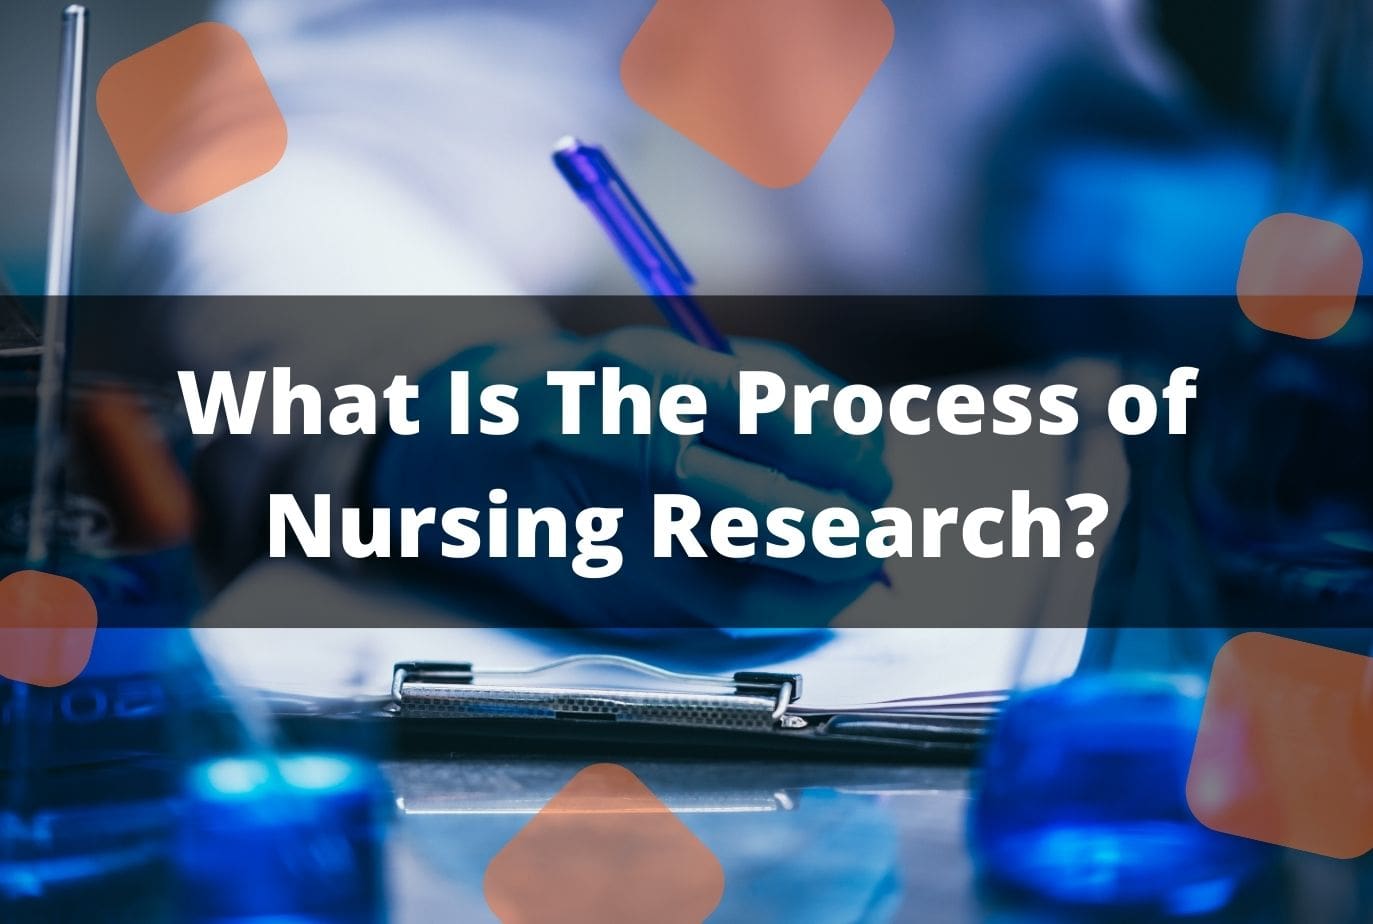 What Is The Process of Nursing Research?